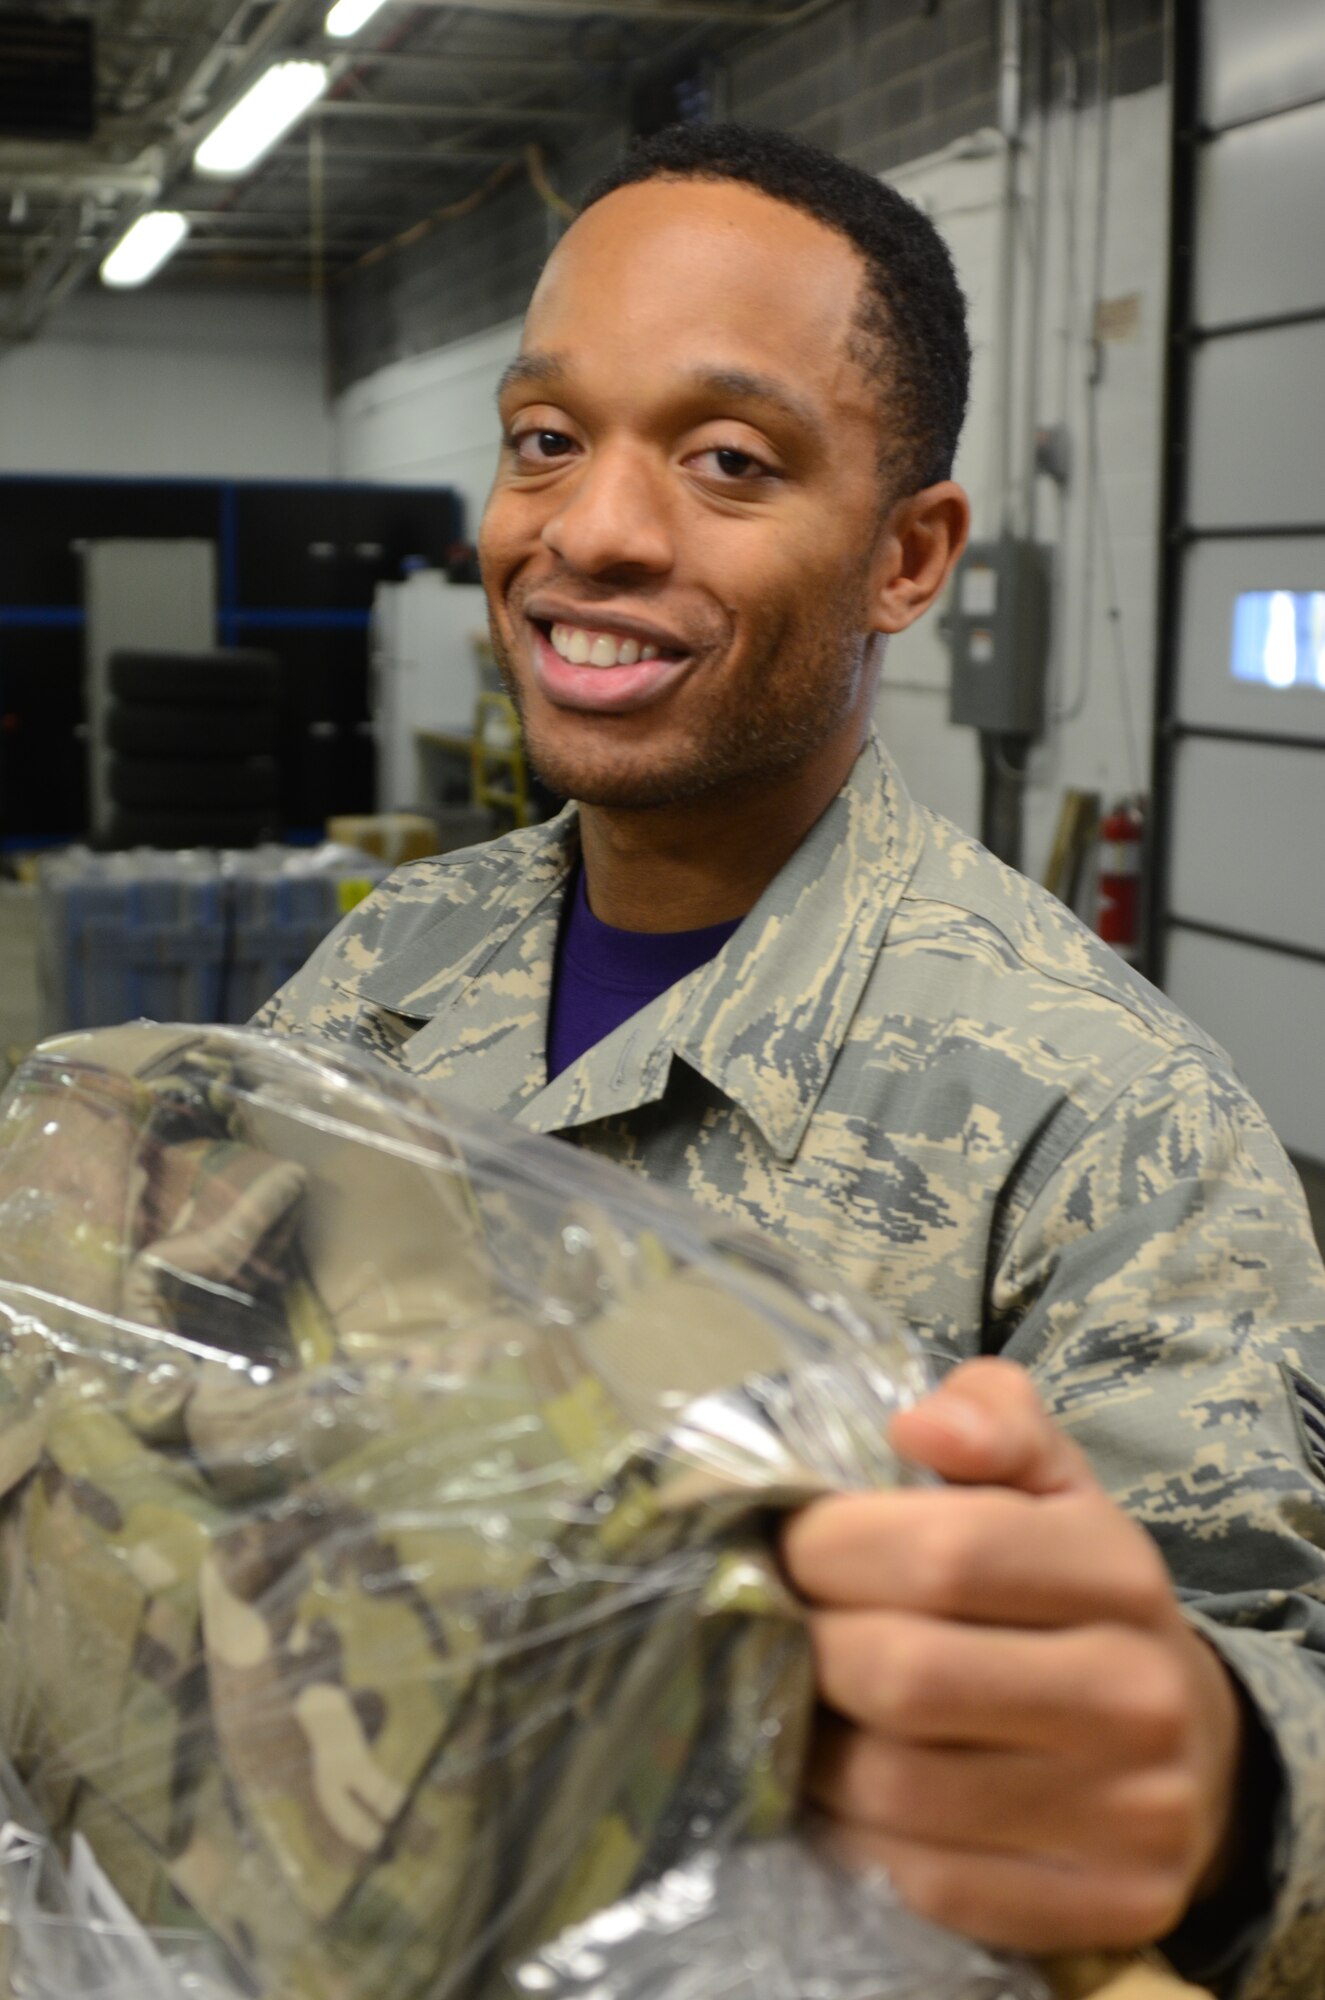 Senior Airman William Greene IV, assigned to the traffic management office,175th Logistic Readiness Squadron, unpacks new Air Force equipment at Warfield Air National Guard Base in Baltimore Dec. 4, 2015. Green, who processes inbound parcels for the entire base, was selected as the Spotlight Airman for the month of February in the Maryland Air National Guard.(U.S. Air National Guard photo by Tech. Sgt. David Speicher/RELEASED)